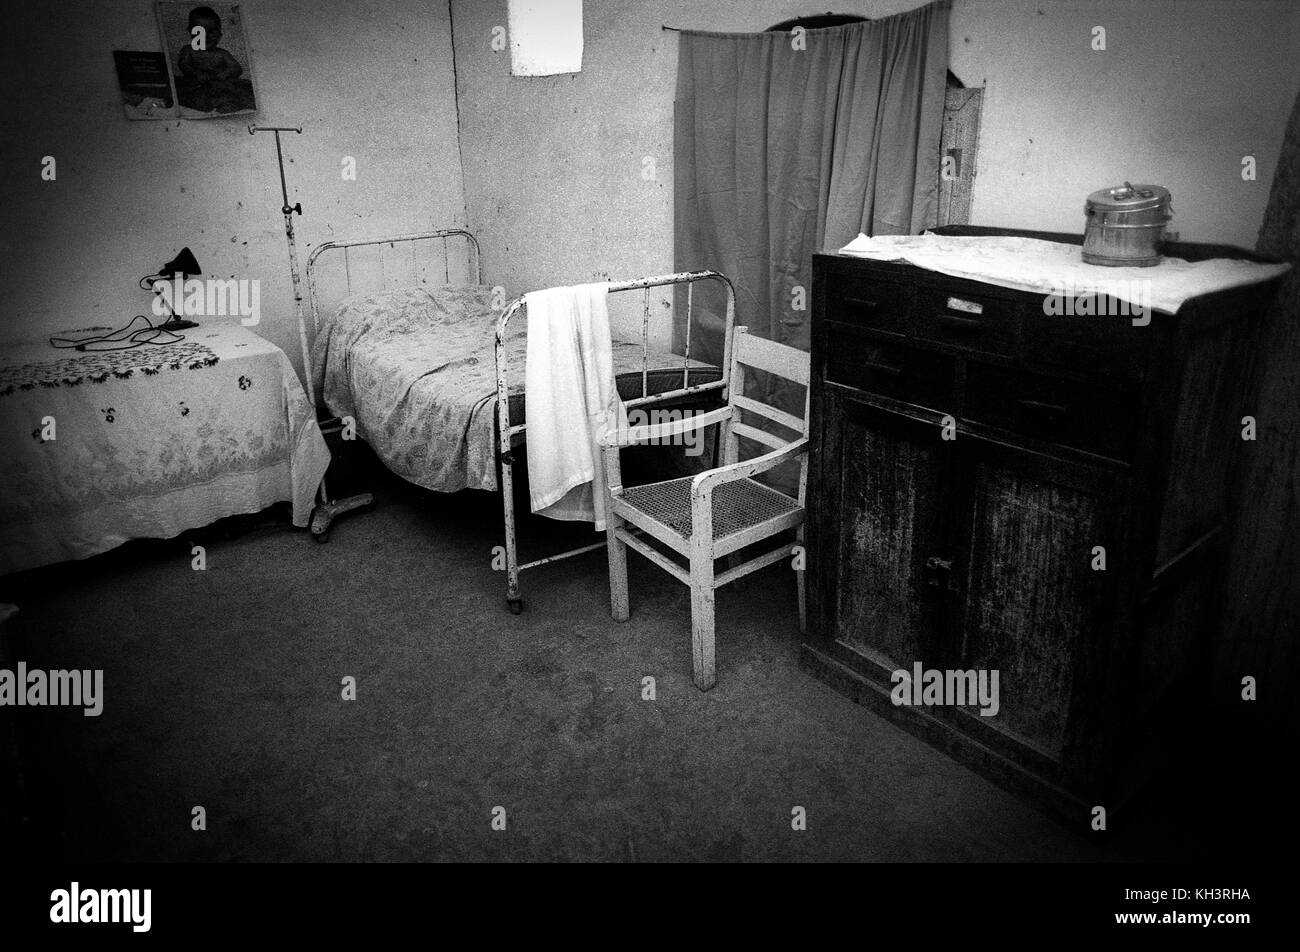 Image of a room of a small clinic in the refugee camp of Jalozai, Peshawar, Pakistan. Date: 08/2000. Photo: Xabier Mikel Laburu. Stock Photo